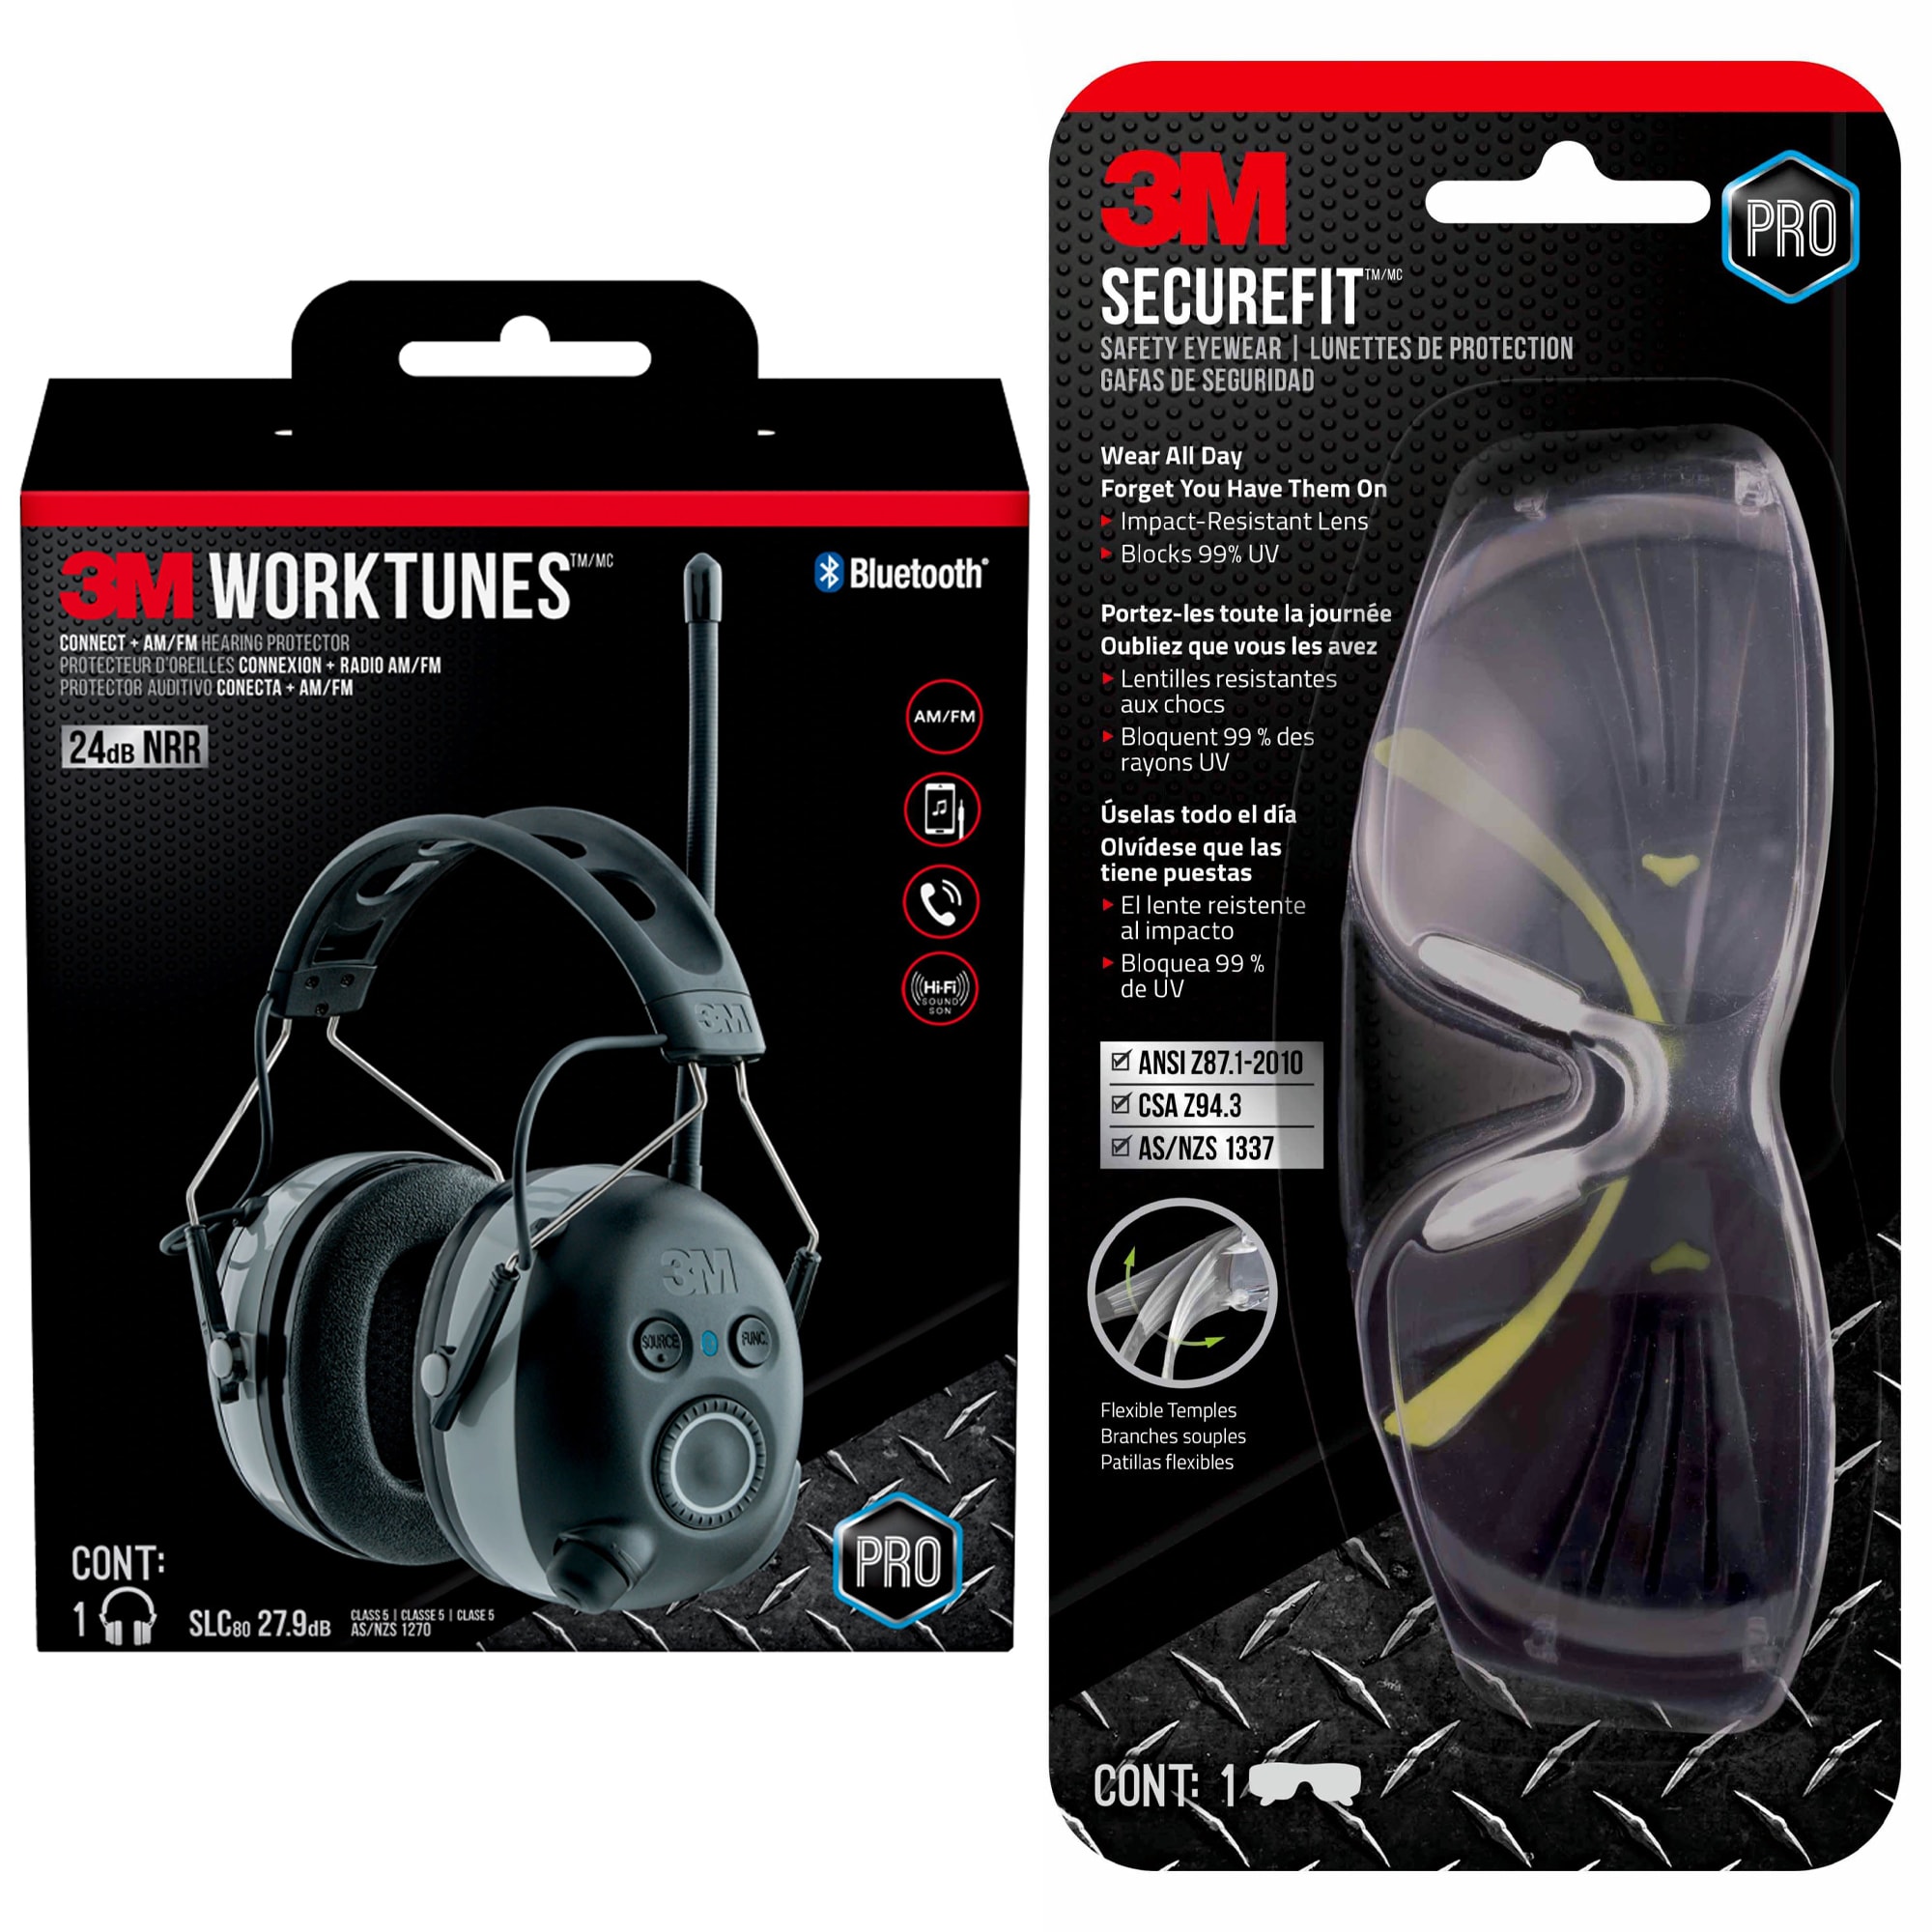 3M WorkTunes Connect + AM/FM Hearing Protection Earmuffs with AM